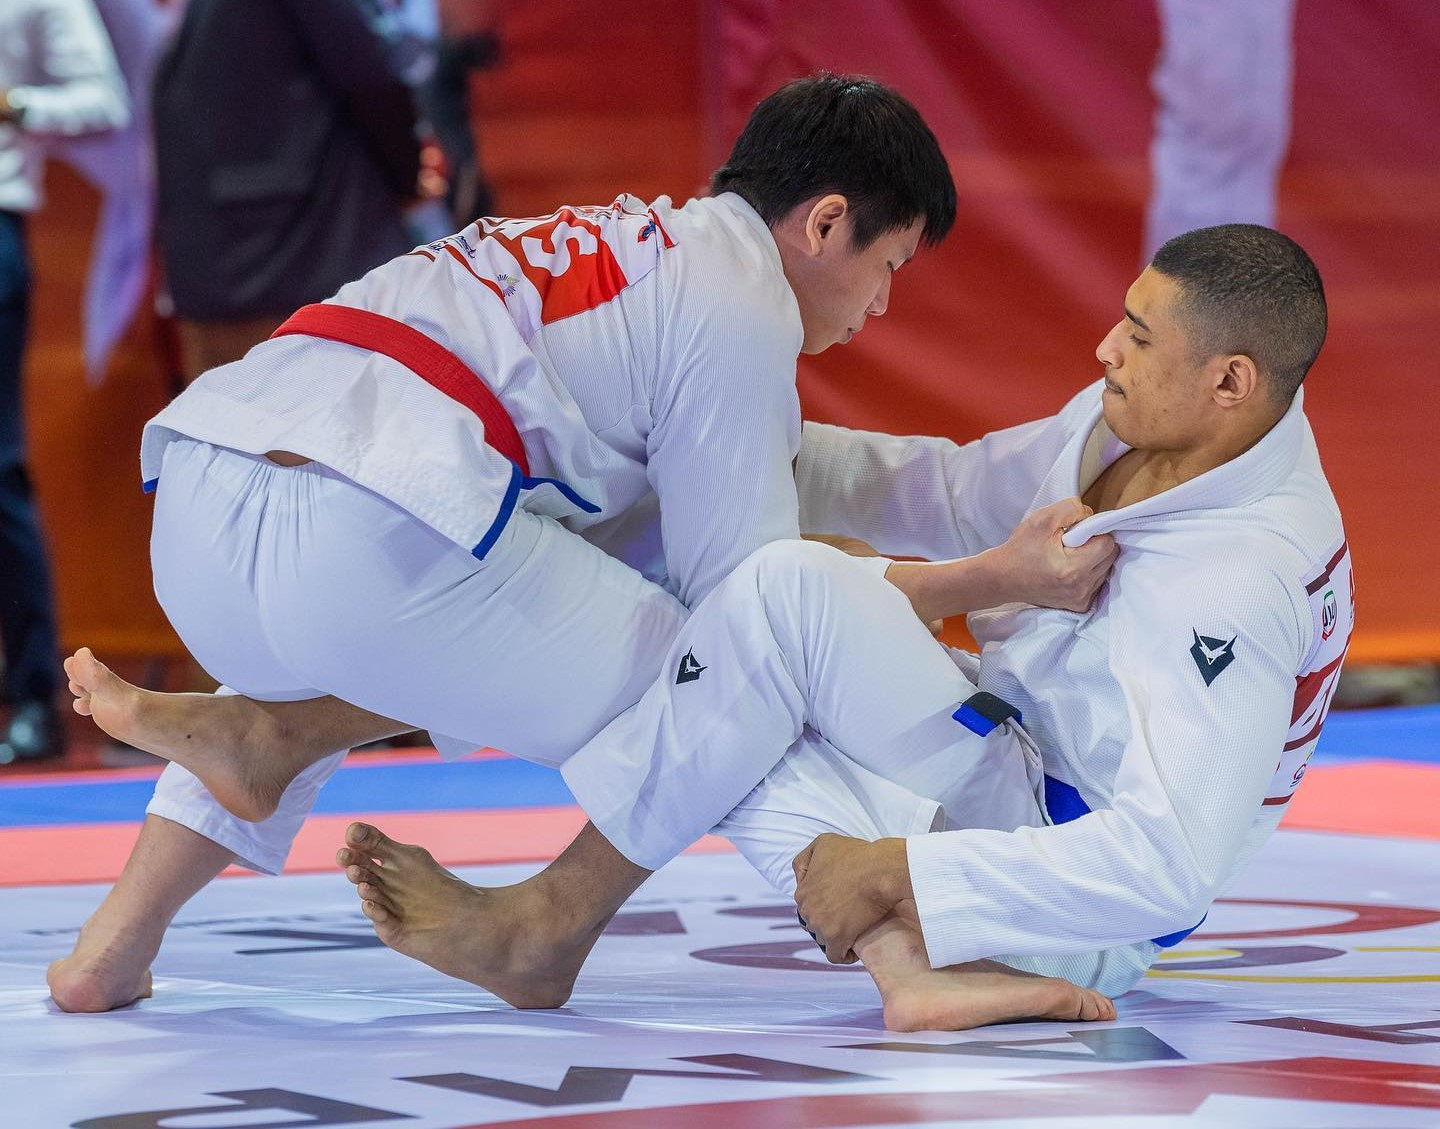 The UAE and Philippines both won three gold medals on day two of the Ju-Jitsu Asian Championships ©JJAU